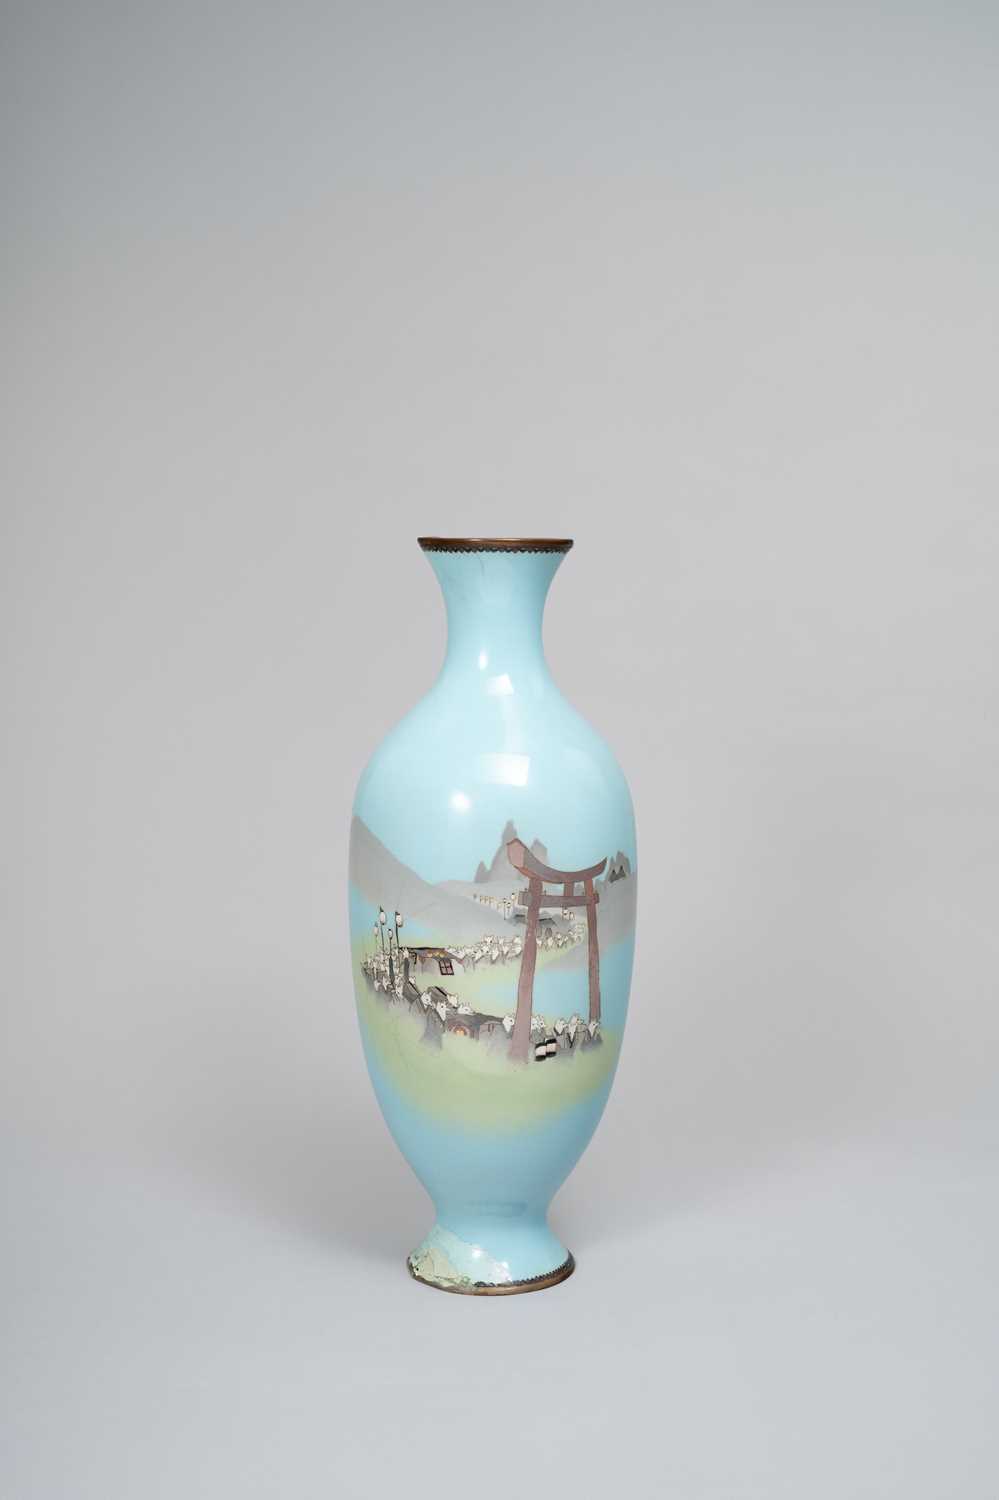 NO RESERVE A TALL JAPANESE CLOISONNE VASE WITH A FOX PROCESSION MEIJI ERA, 19TH/20TH CENTURY The